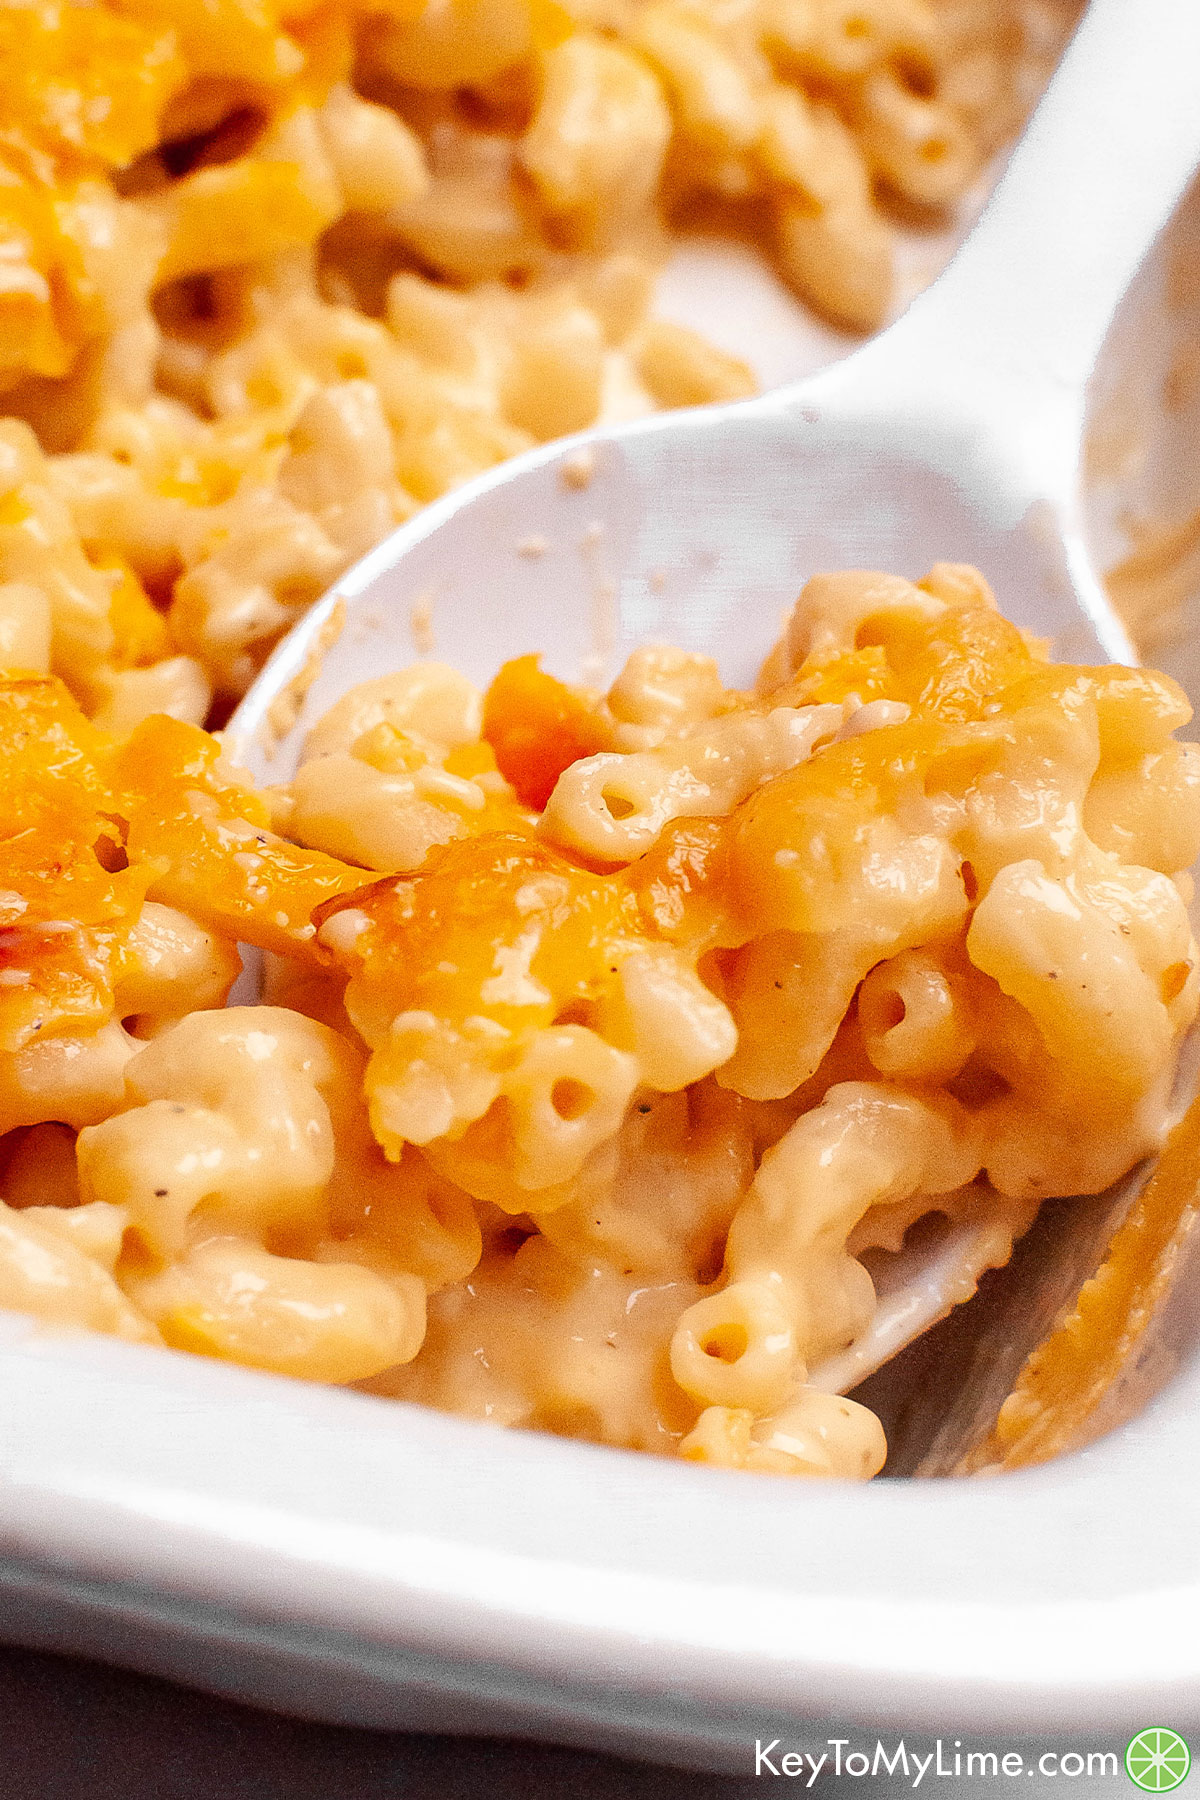 A serving spoon lifting out a serving of baked mac and cheese.